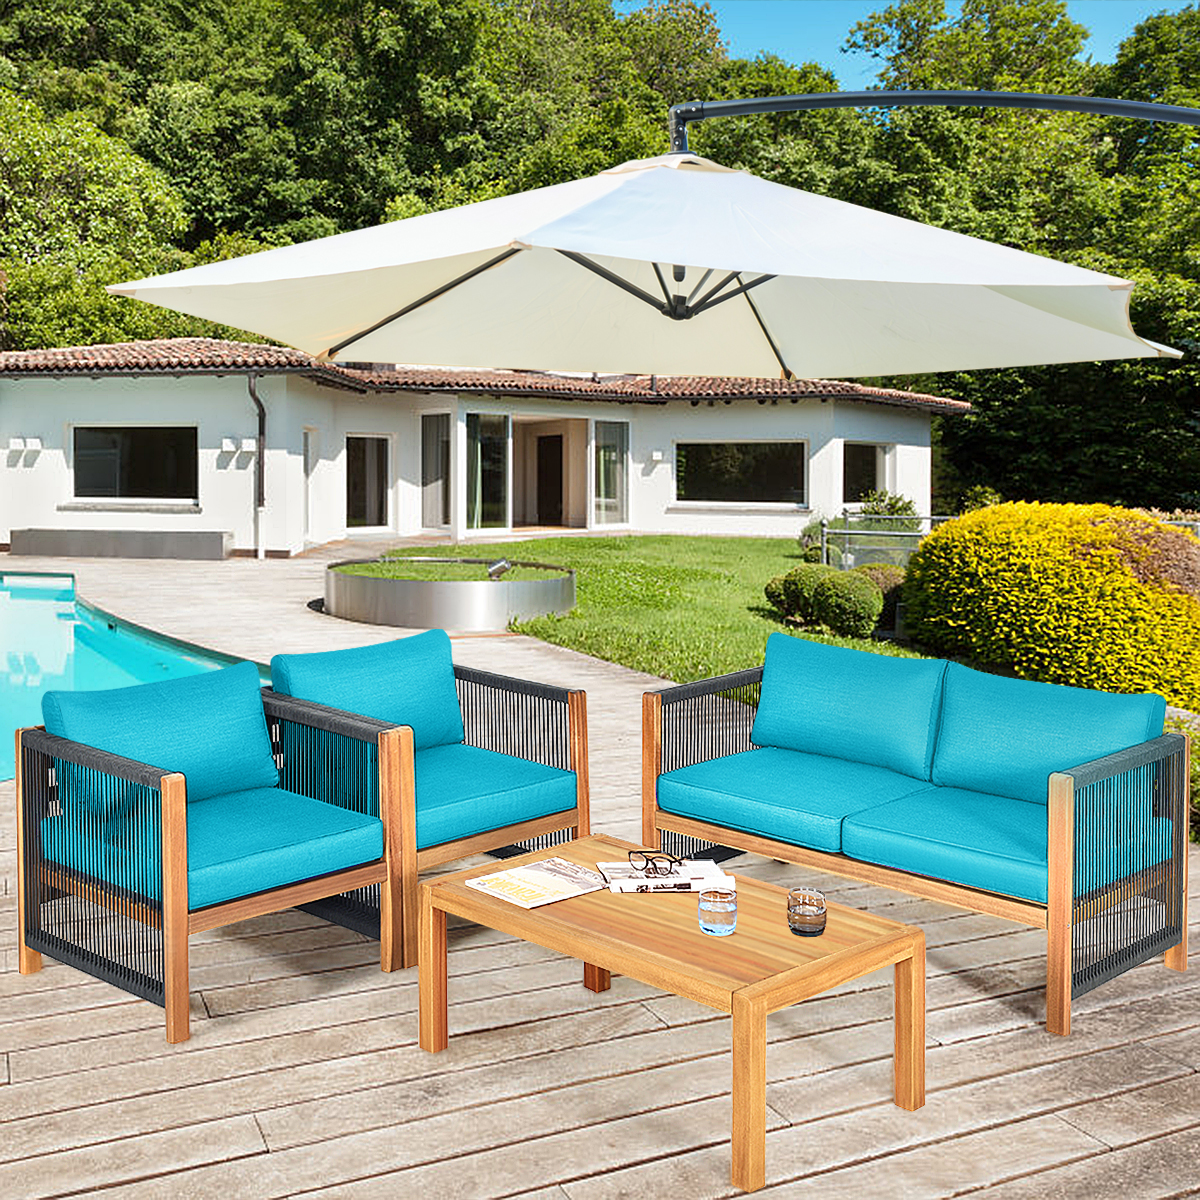 Patiojoy 8-Piece Outdoor Patio Wood Conversation Furniture Set Padded Chair with Coffee Table Turquoise - image 2 of 5